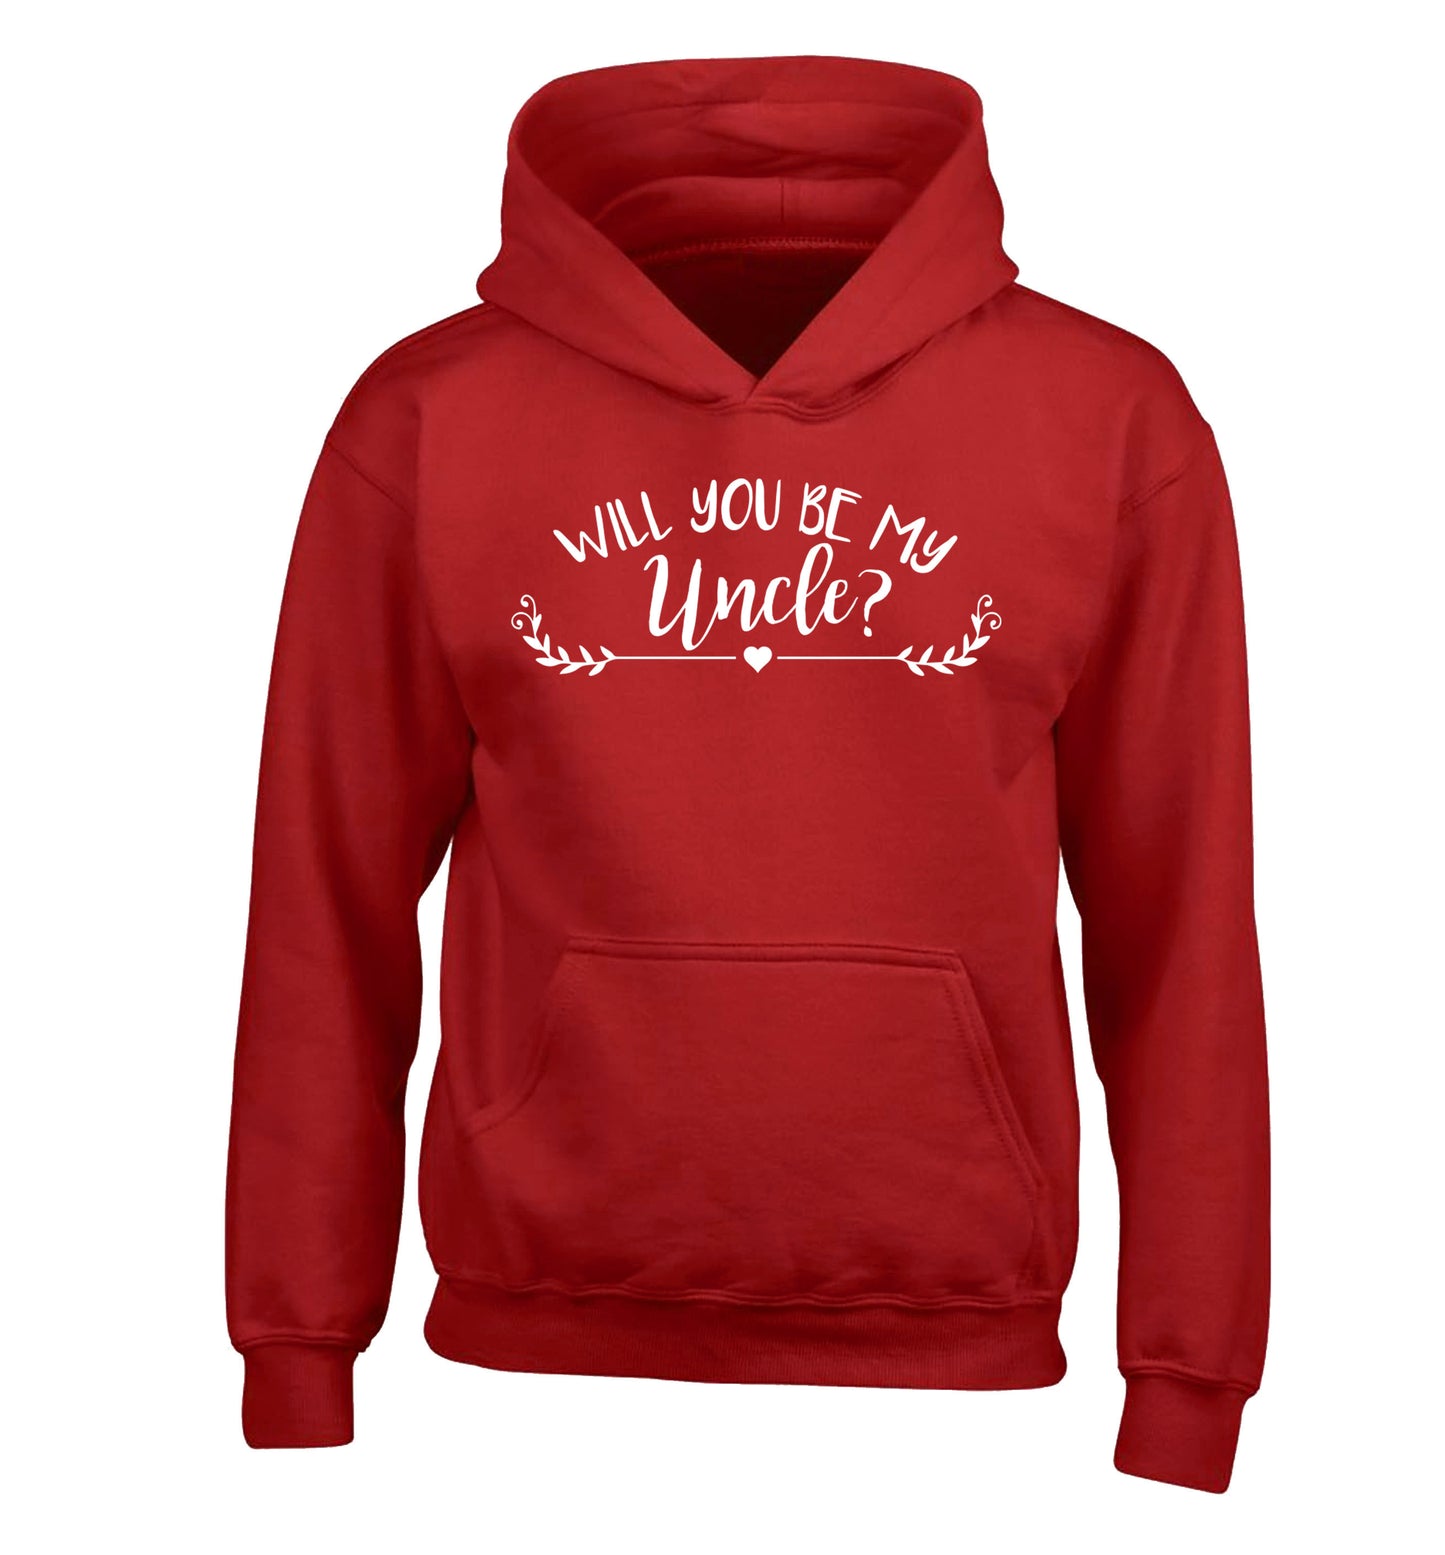 Will you be my uncle? children's red hoodie 12-14 Years